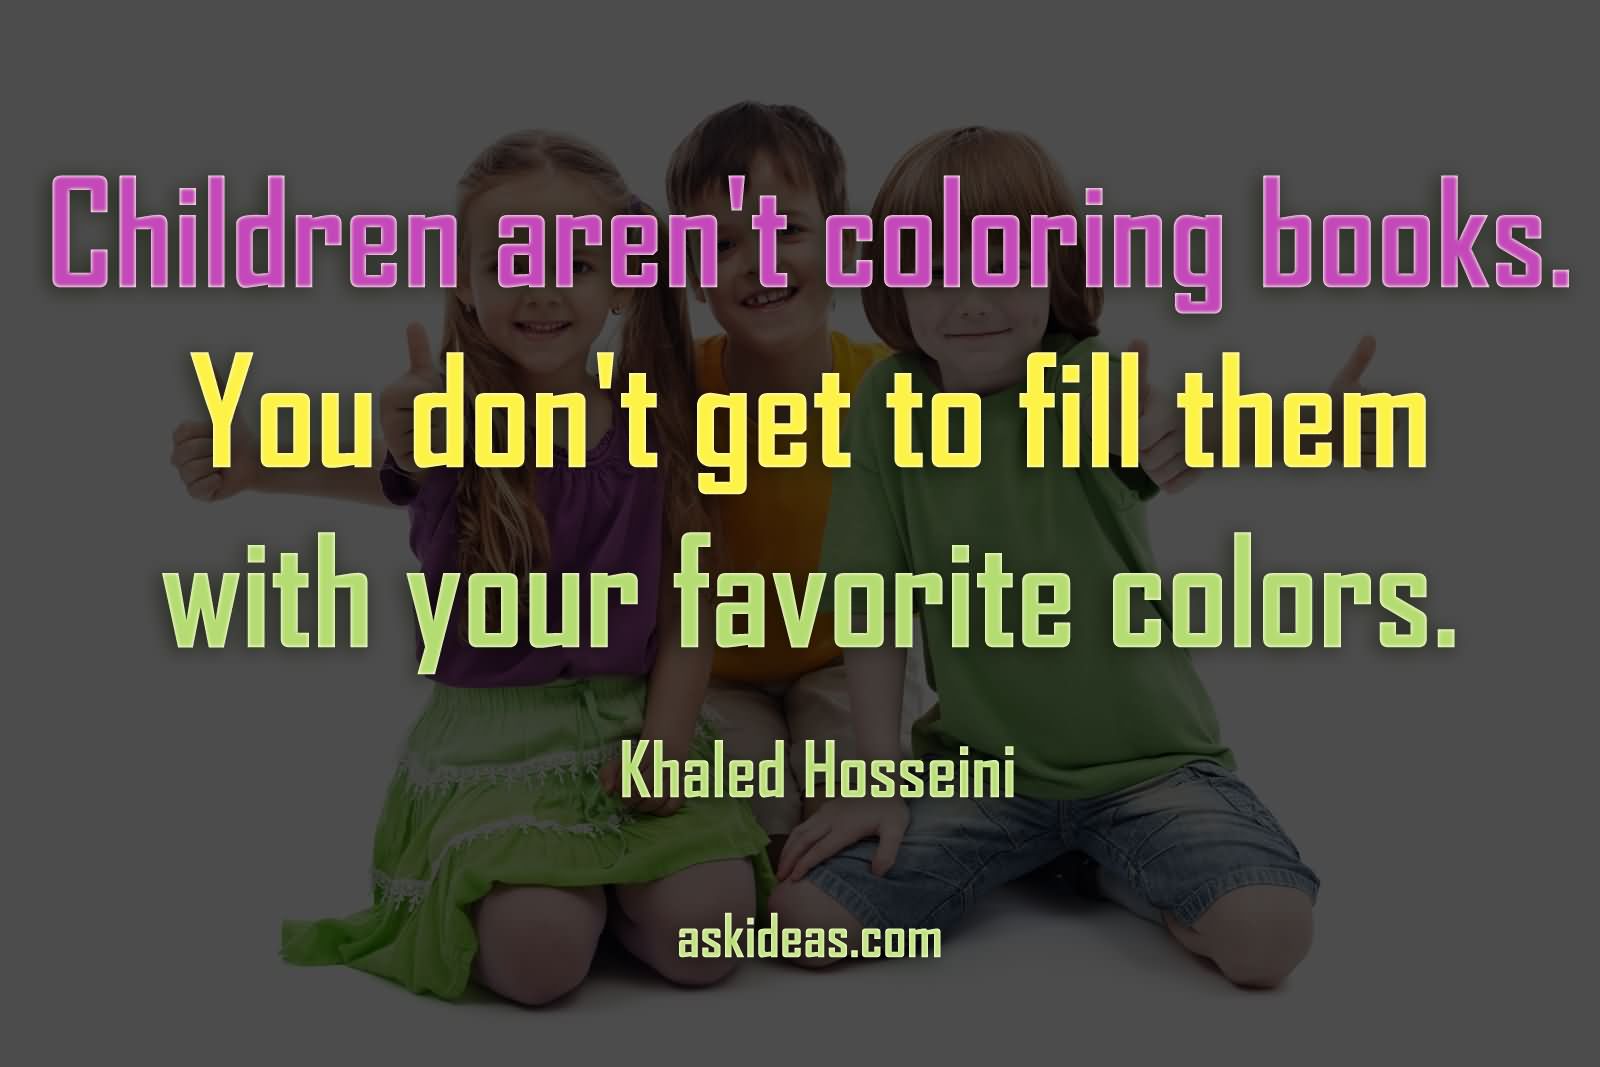 Children aren't coloring books. You don't get to fill them with your favorite colors.